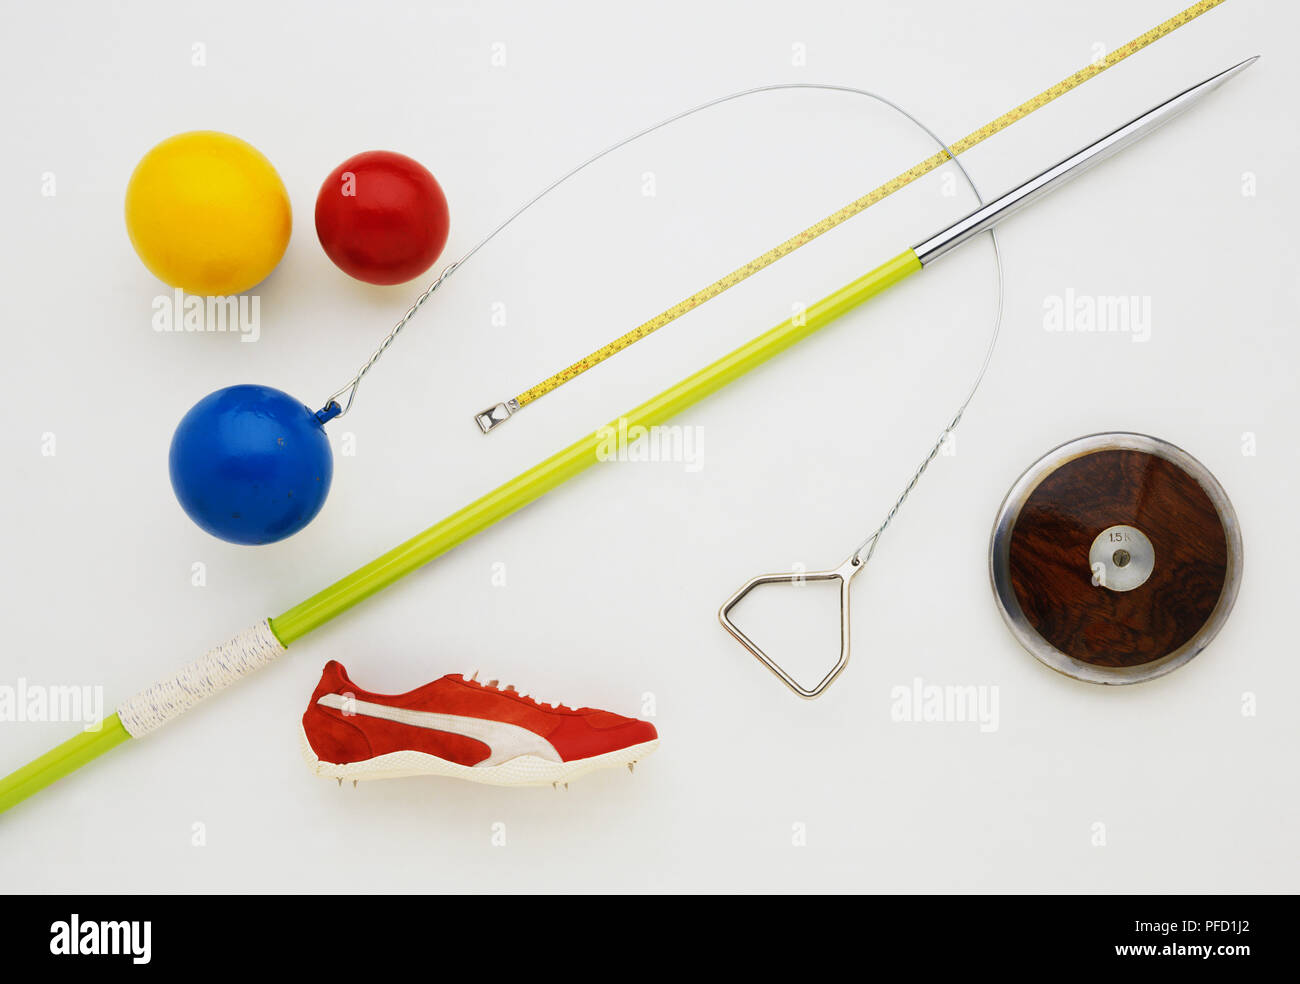 Athletic equipment for throwing events Stock Photo